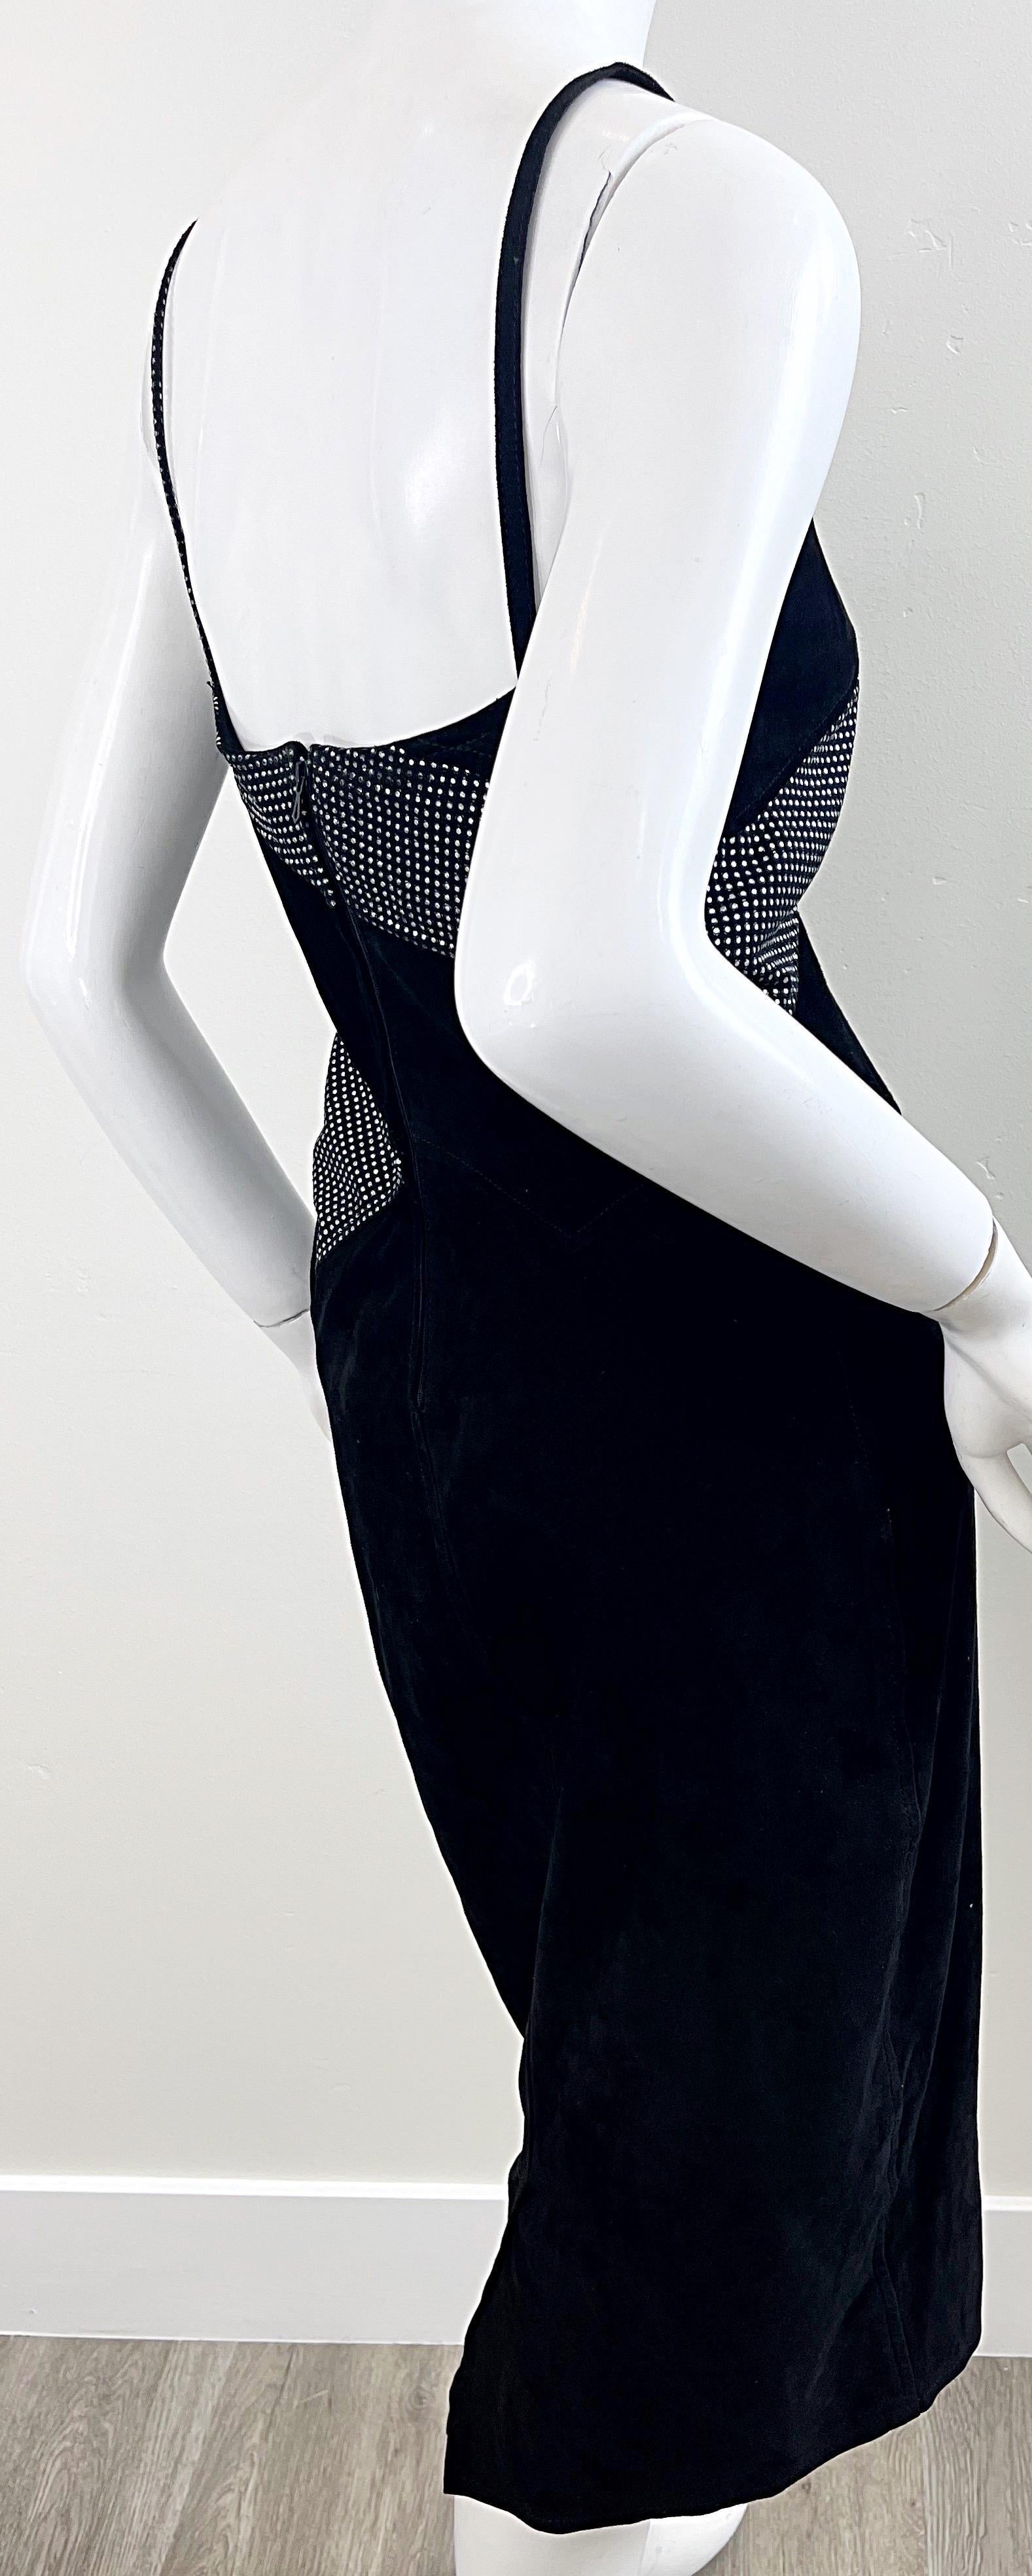 Fendi 1980s Fendissime Black Silver Suede Leather Vintage 80s Hand Painted Dress For Sale 4